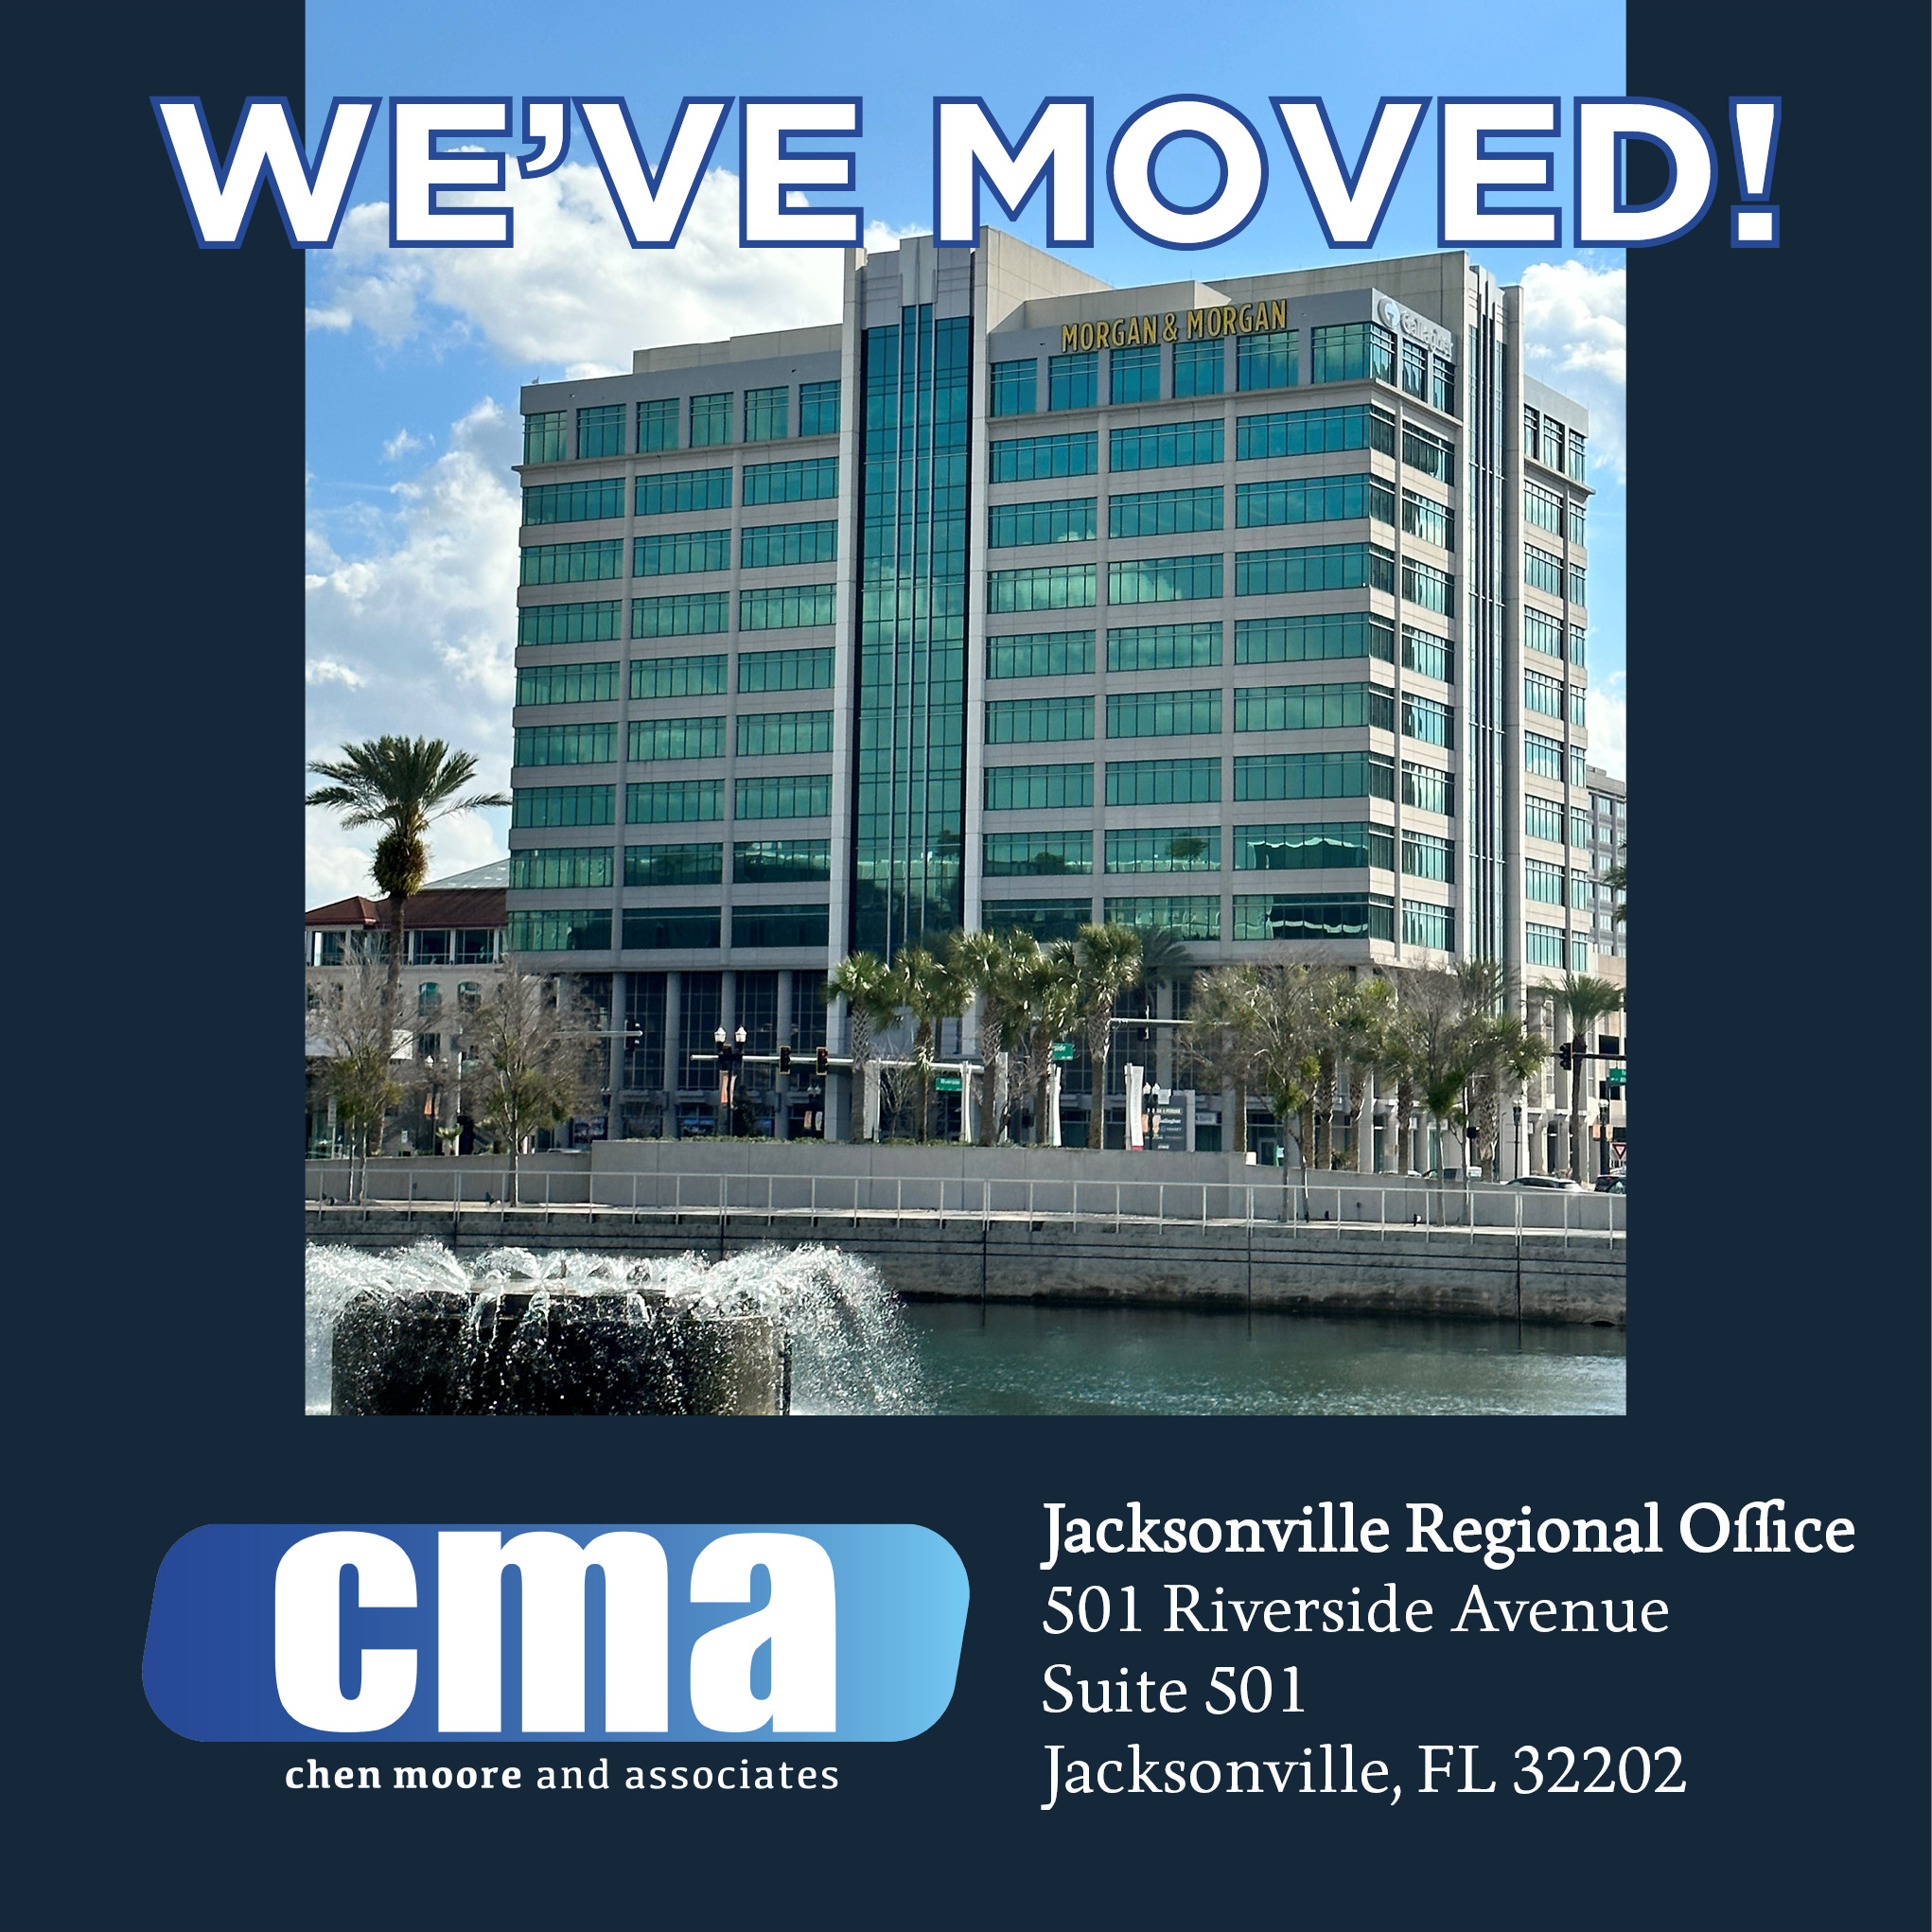 Our Jacksonville Office Has Moved!